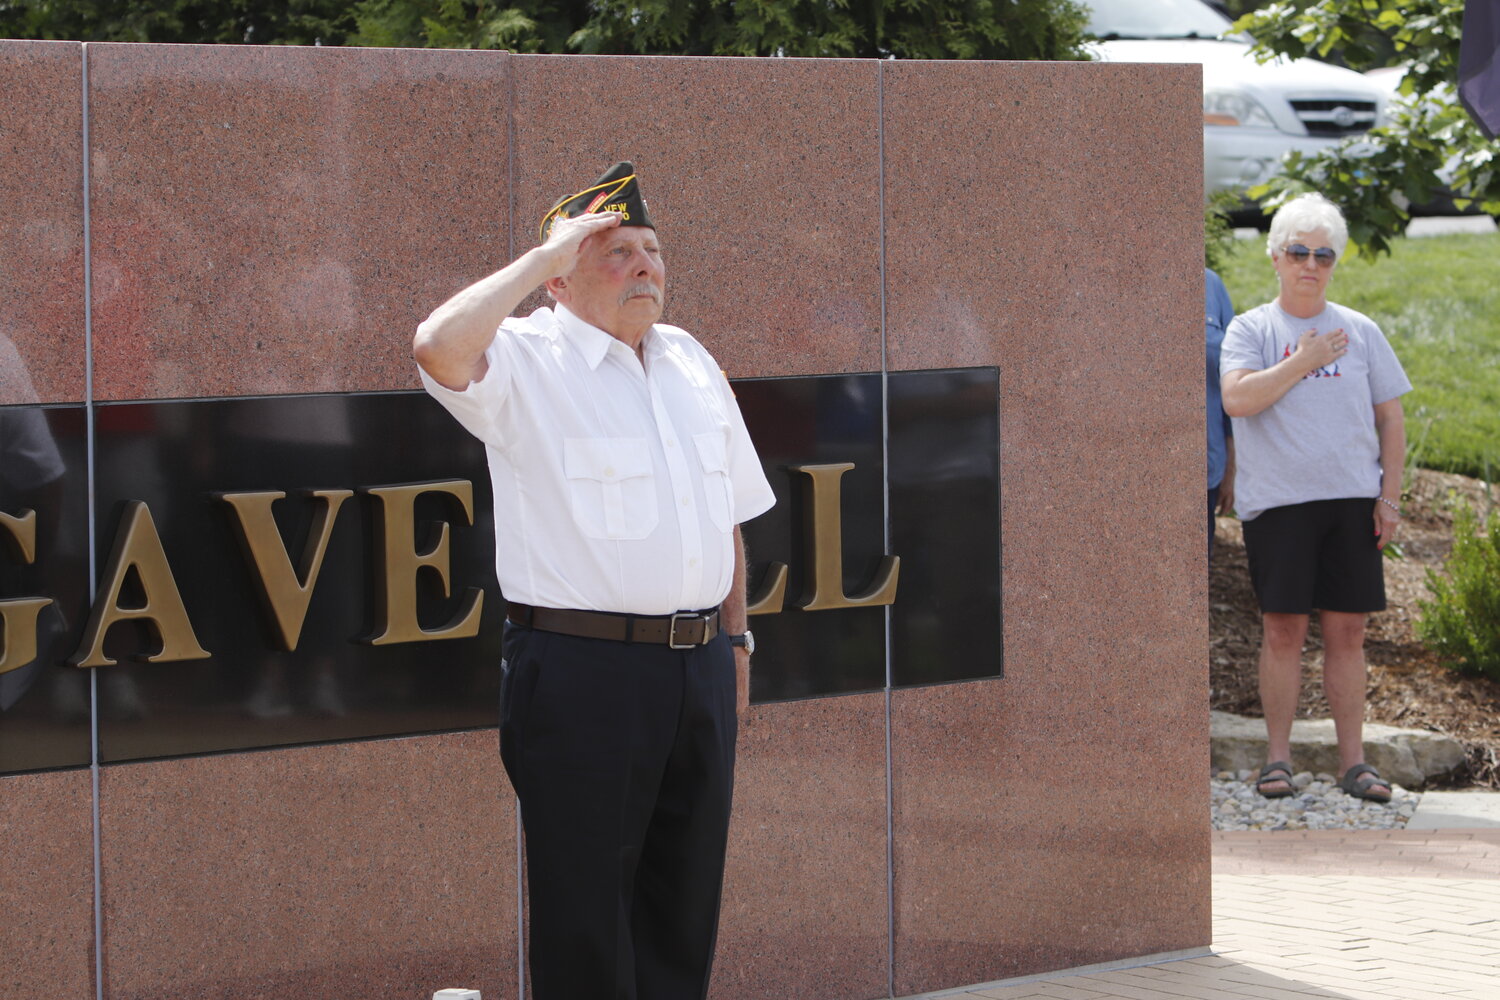 Rick Mantione salutes during the Memorial Day ceremony at the Tribute To Veterans Memorial.